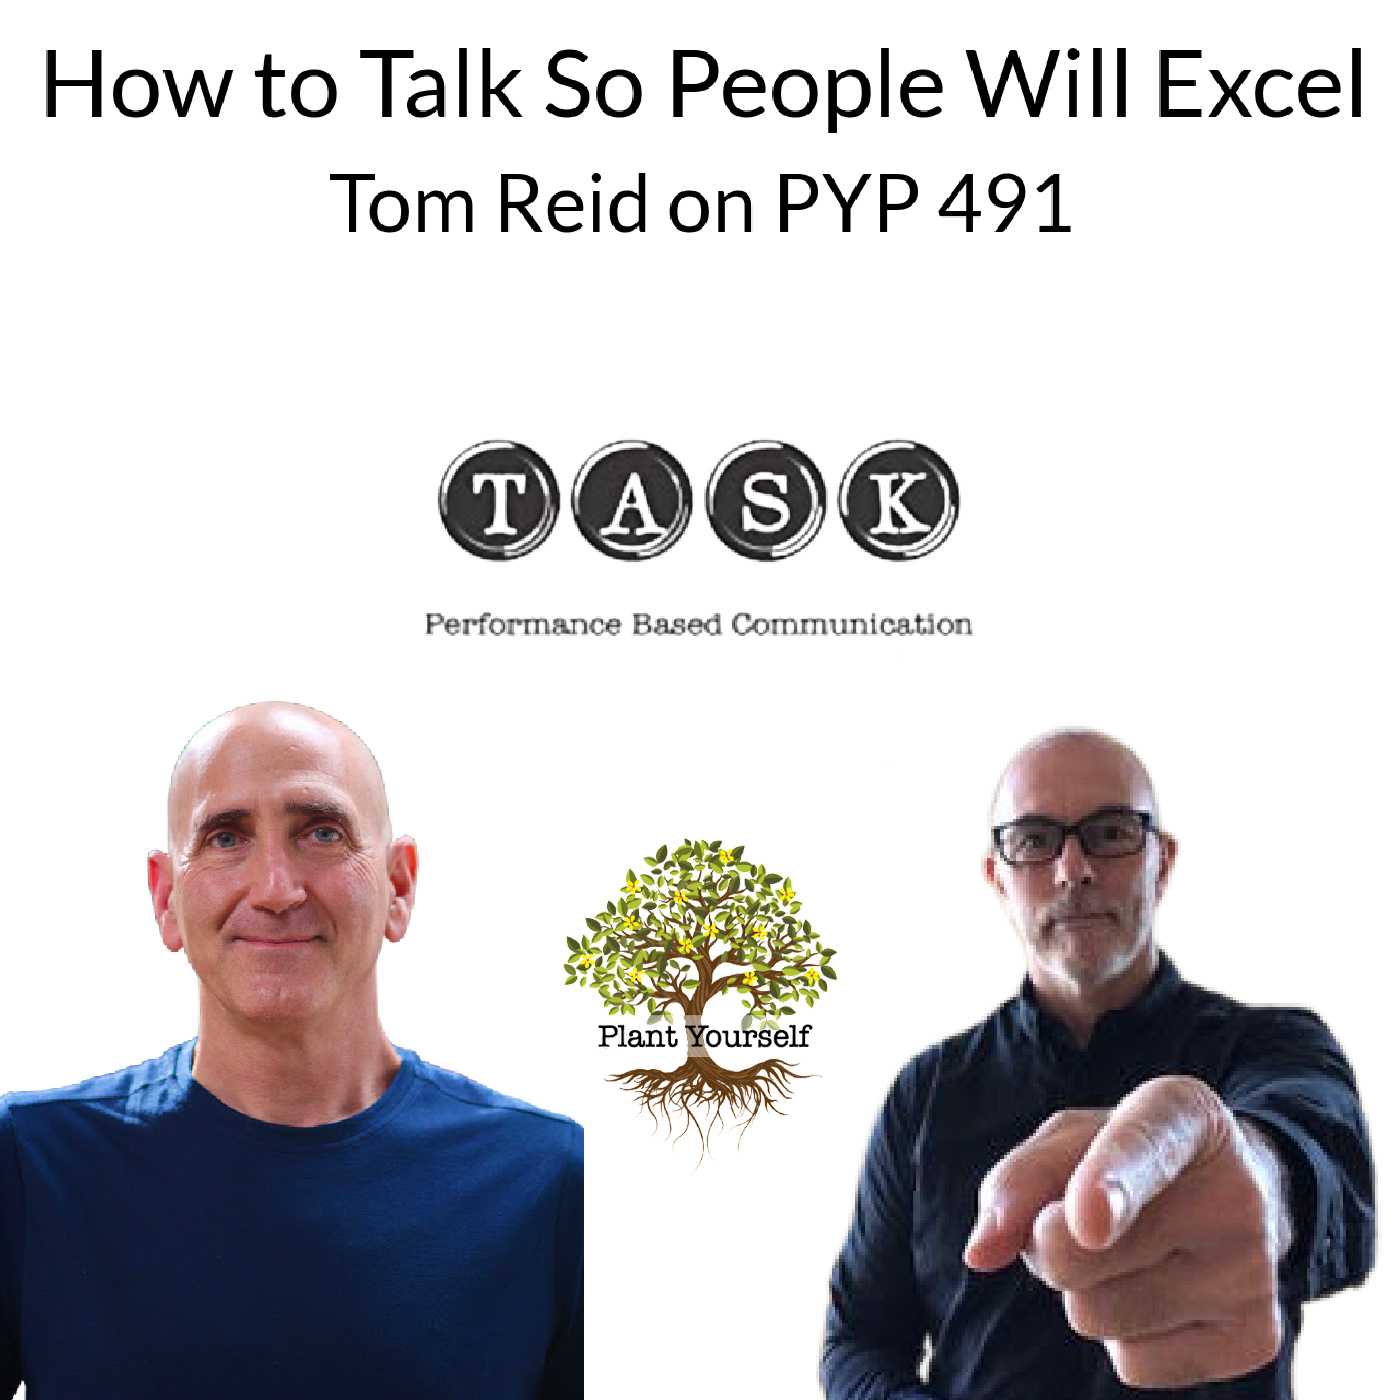 How to Talk So People Will Excel: Tom Reid on PYP 491